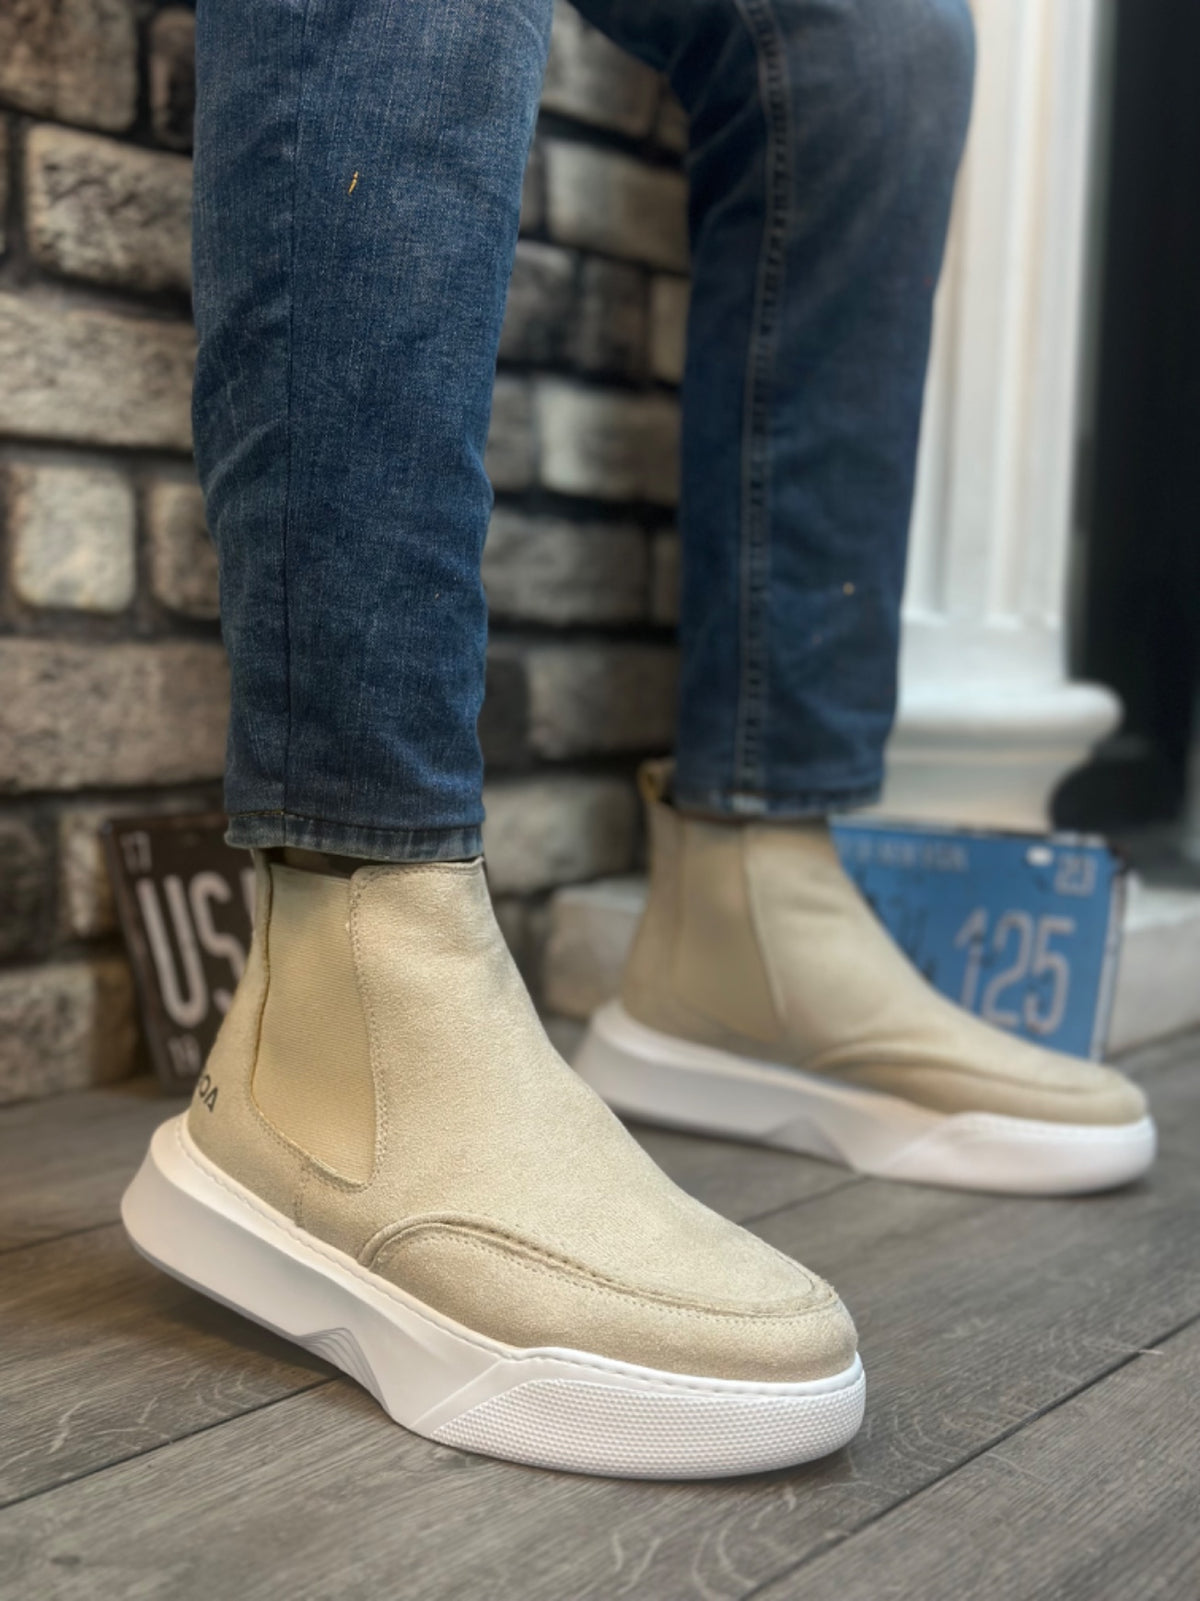 BA0150 Laceless Men's Cream Suede High Sole Sports Boots - STREETMODE ™